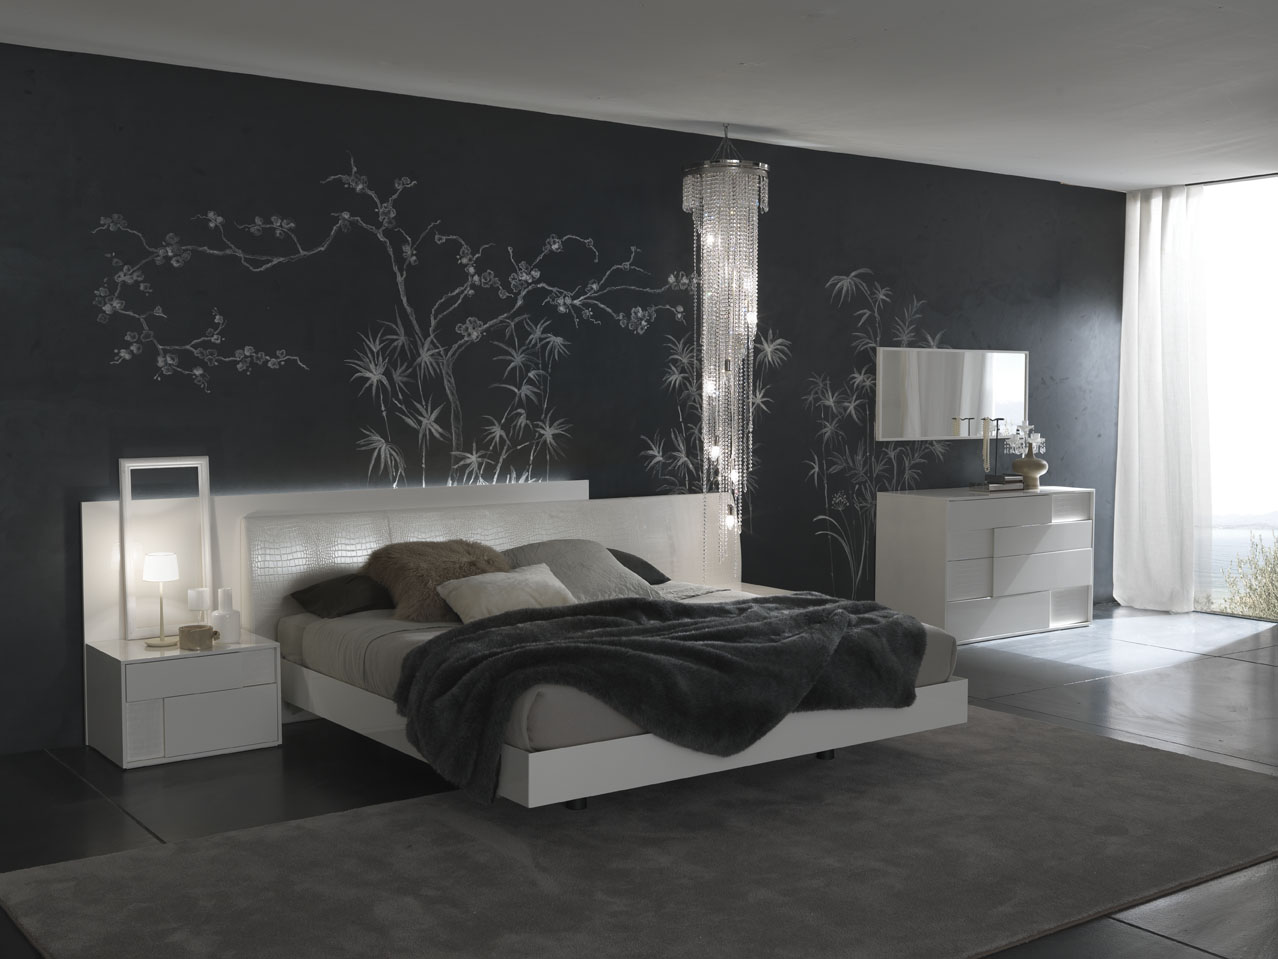 Modern Bedroom Wallpaper Designs - Room Design For Newly Married Couple - HD Wallpaper 